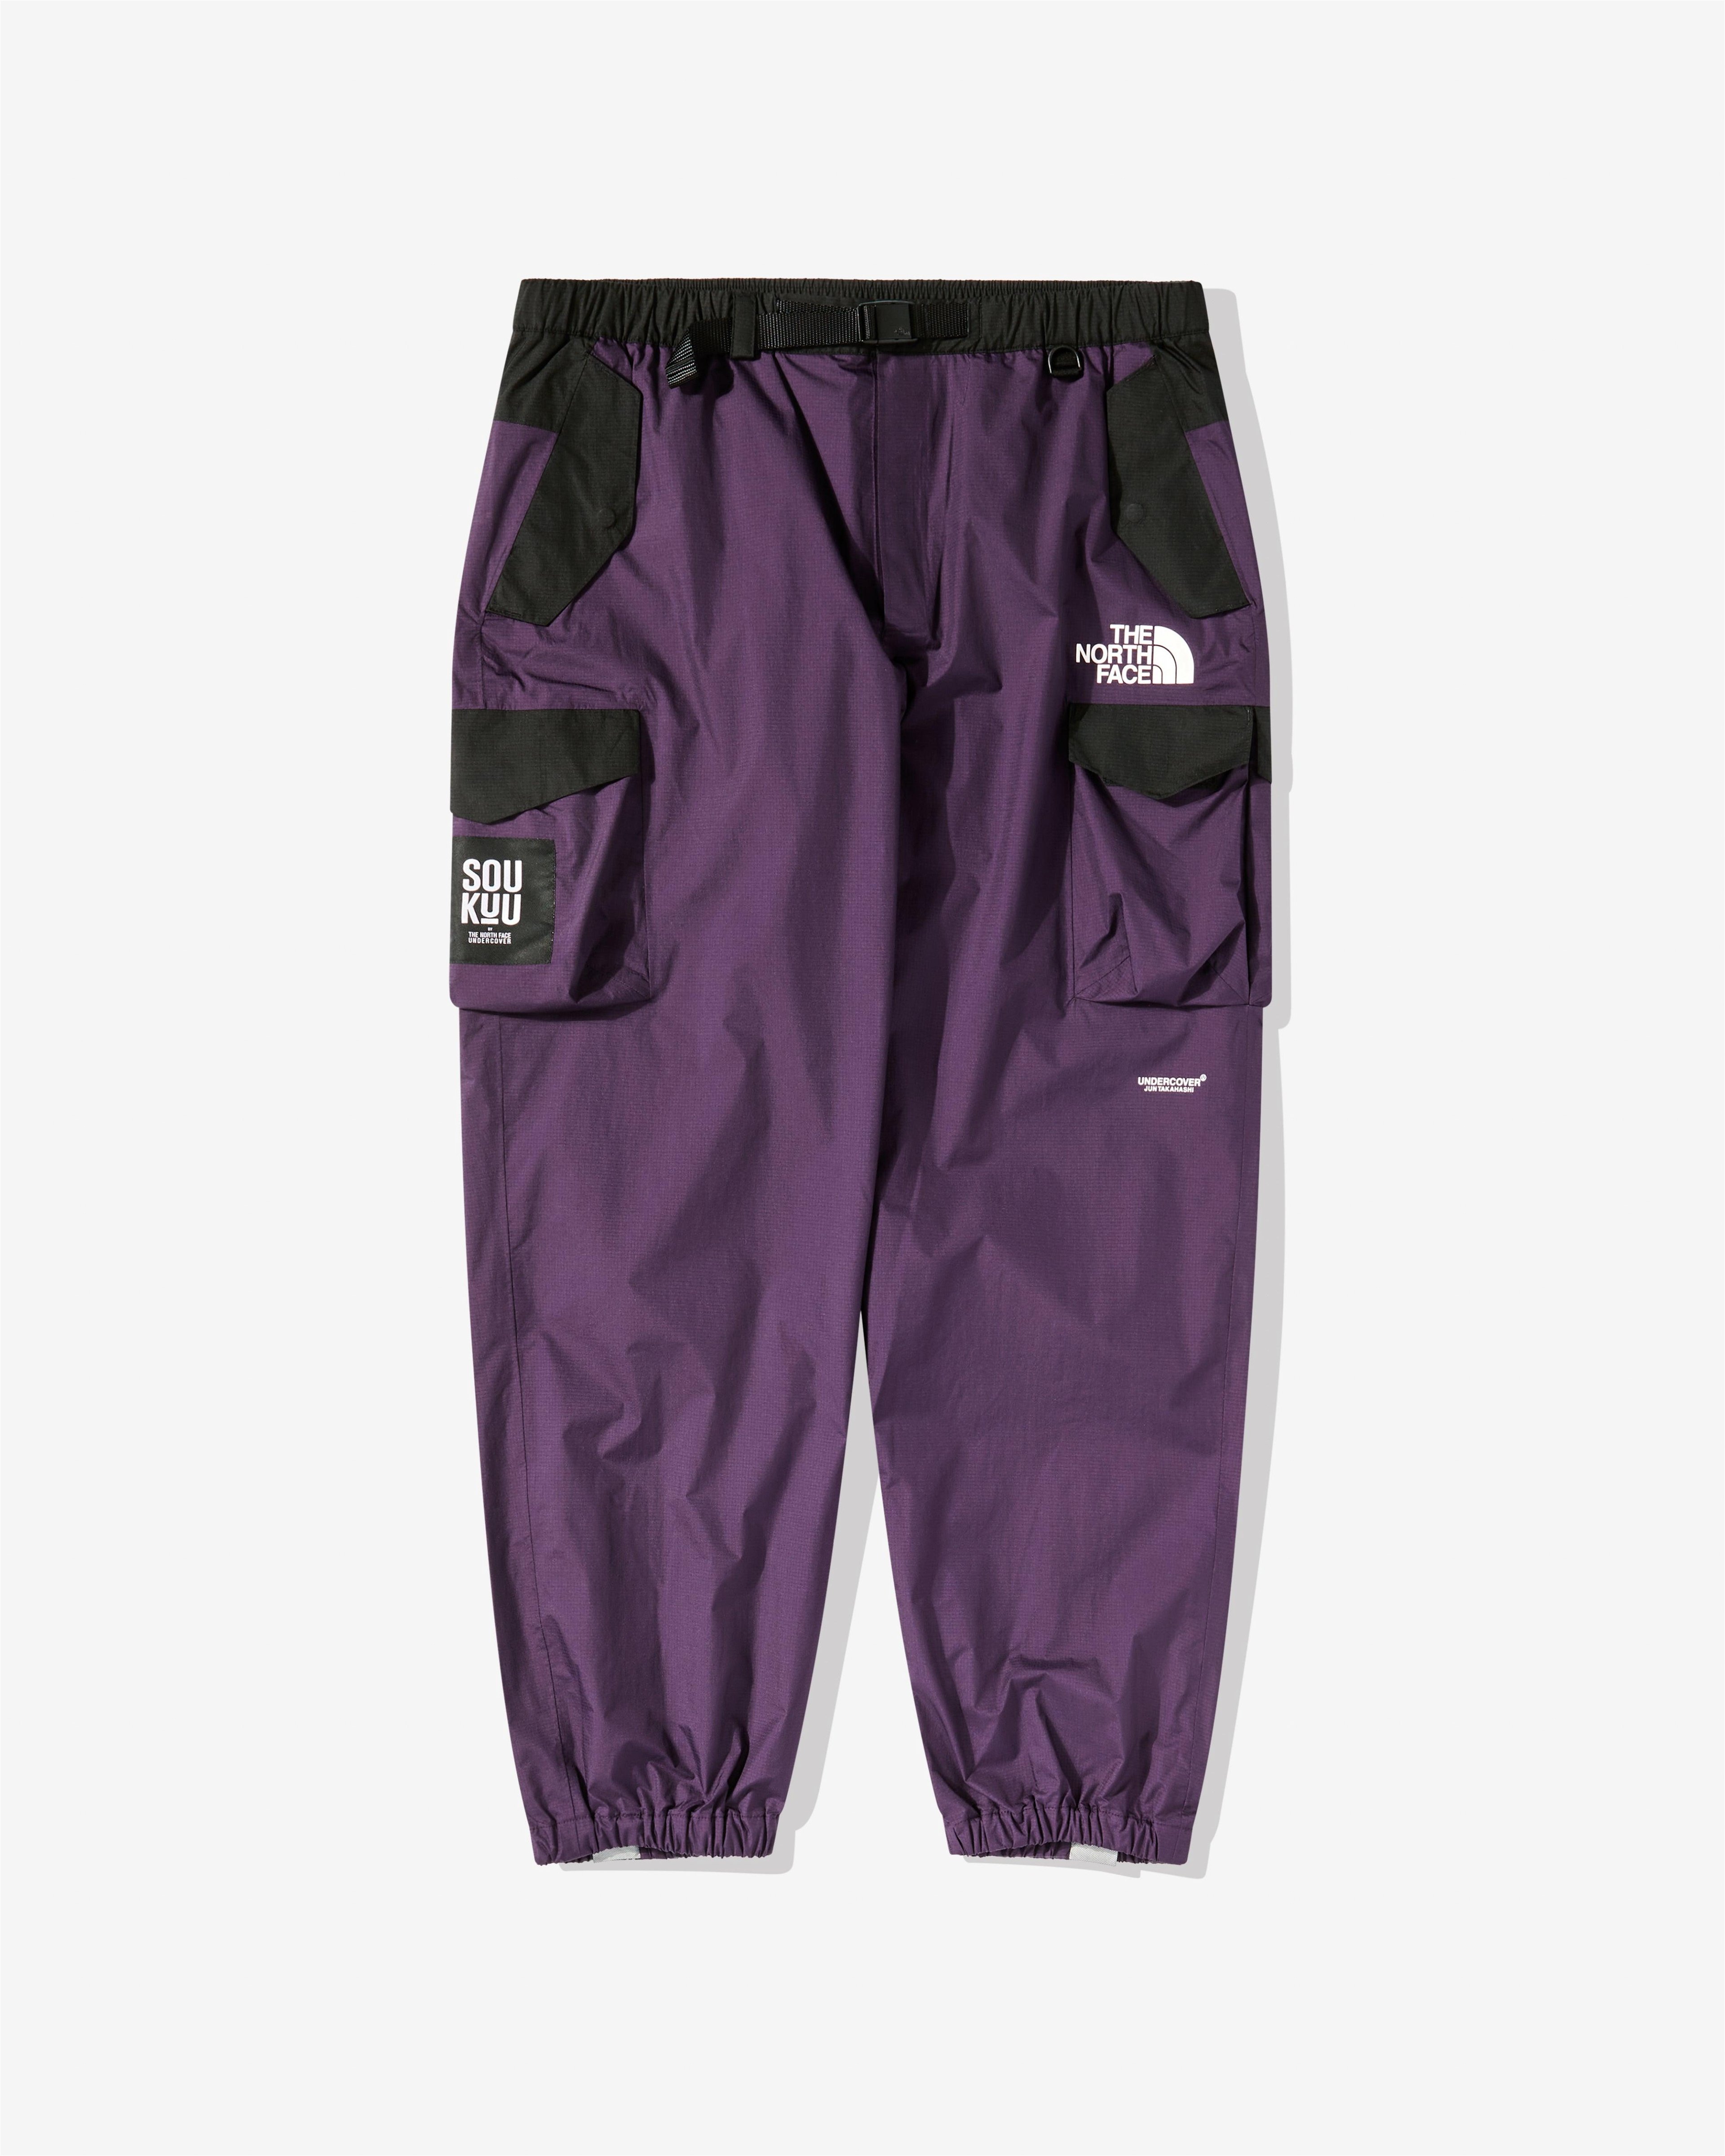 The North Face - Undercover Soukuu Hike Belted Utility Shell Pant - (Purple) by THE NORTH FACE